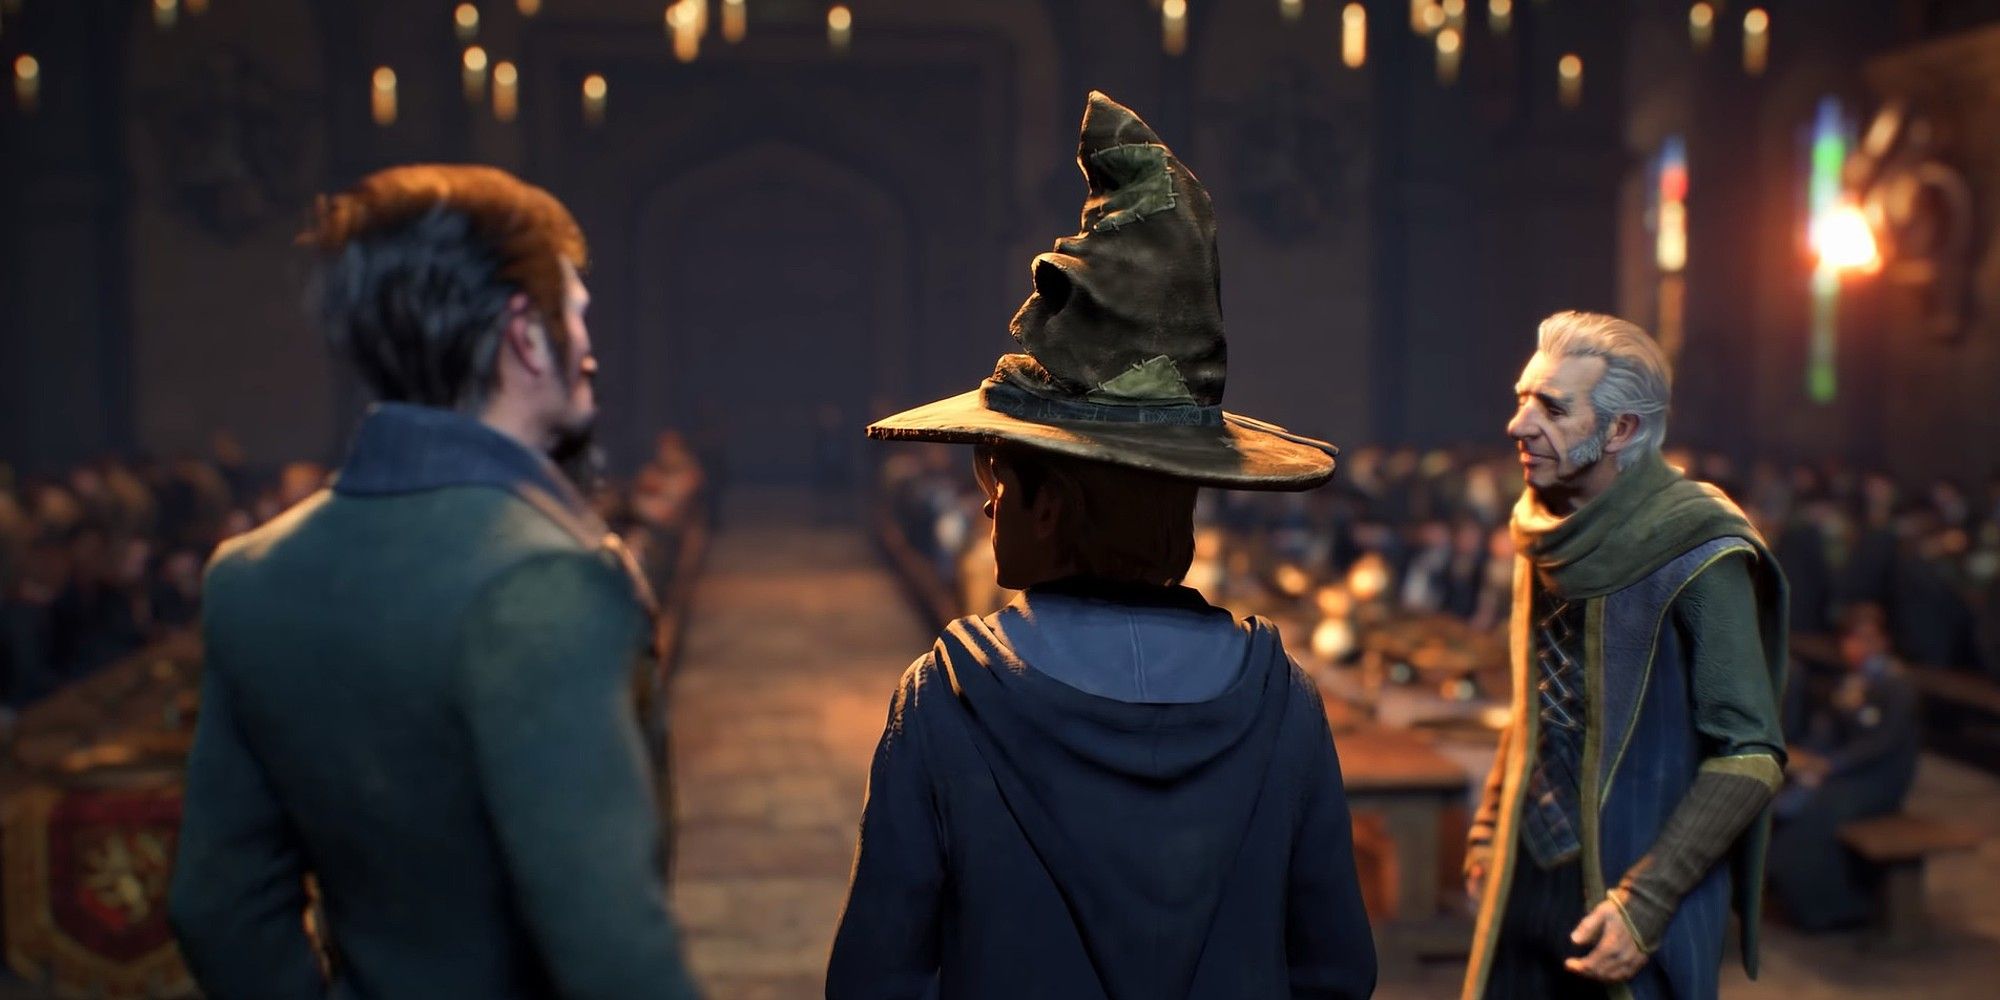 Hogwarts legacy scene with sorting hat